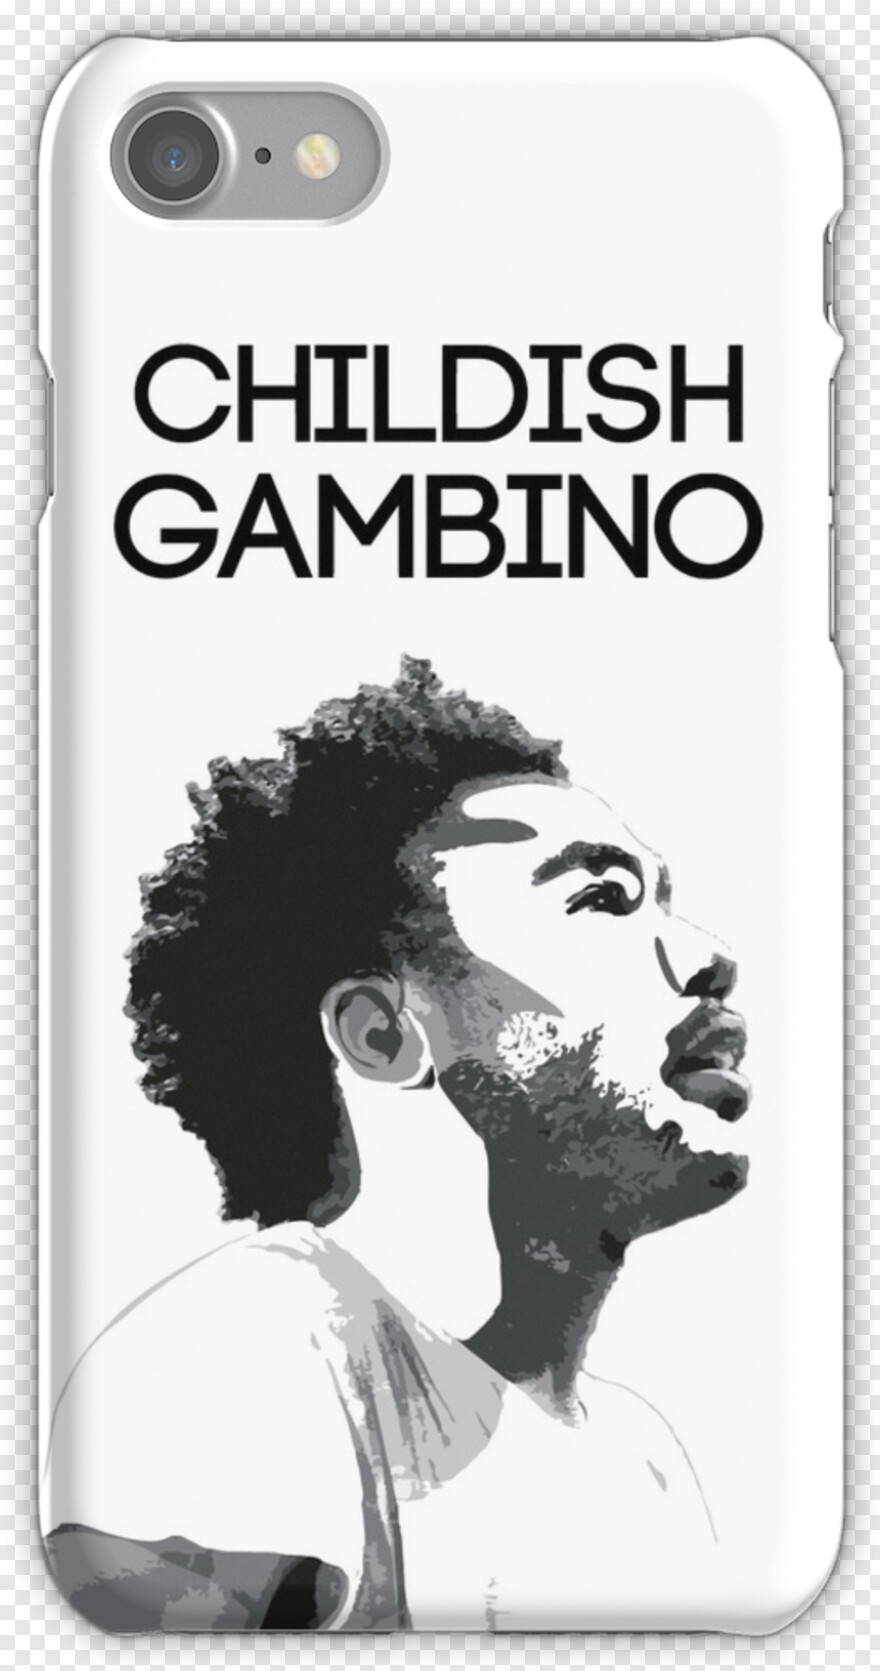  Cd Case, Childish Gambino, Iphone Outline, Person Outline, Iphone Mobile, Phone Outline